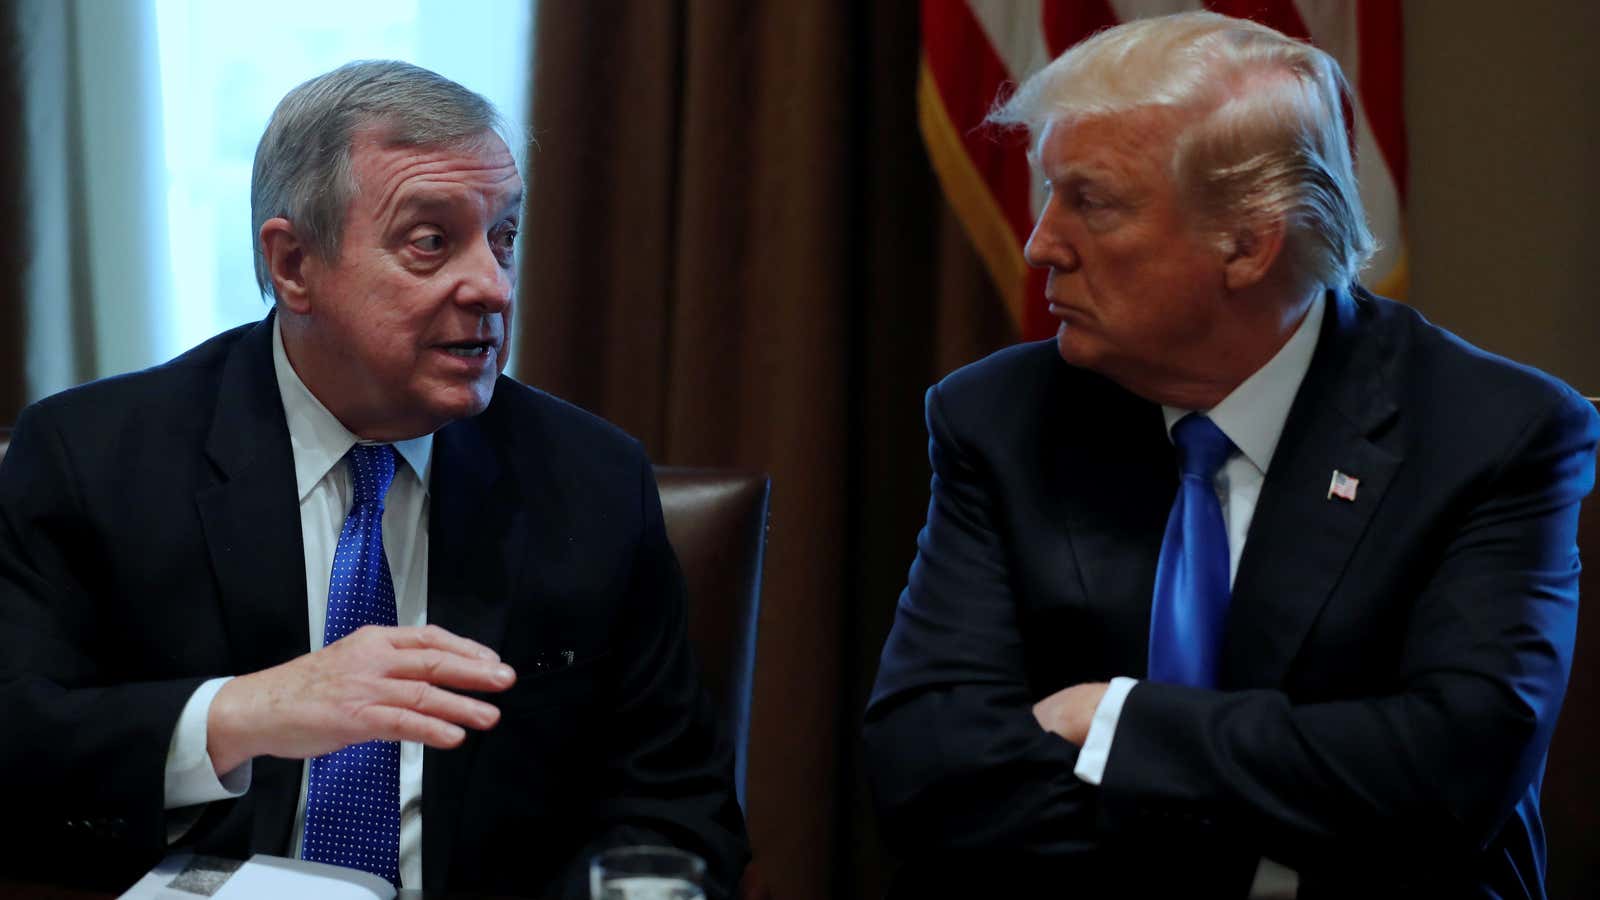 Durbin and the man who lives in the White House.